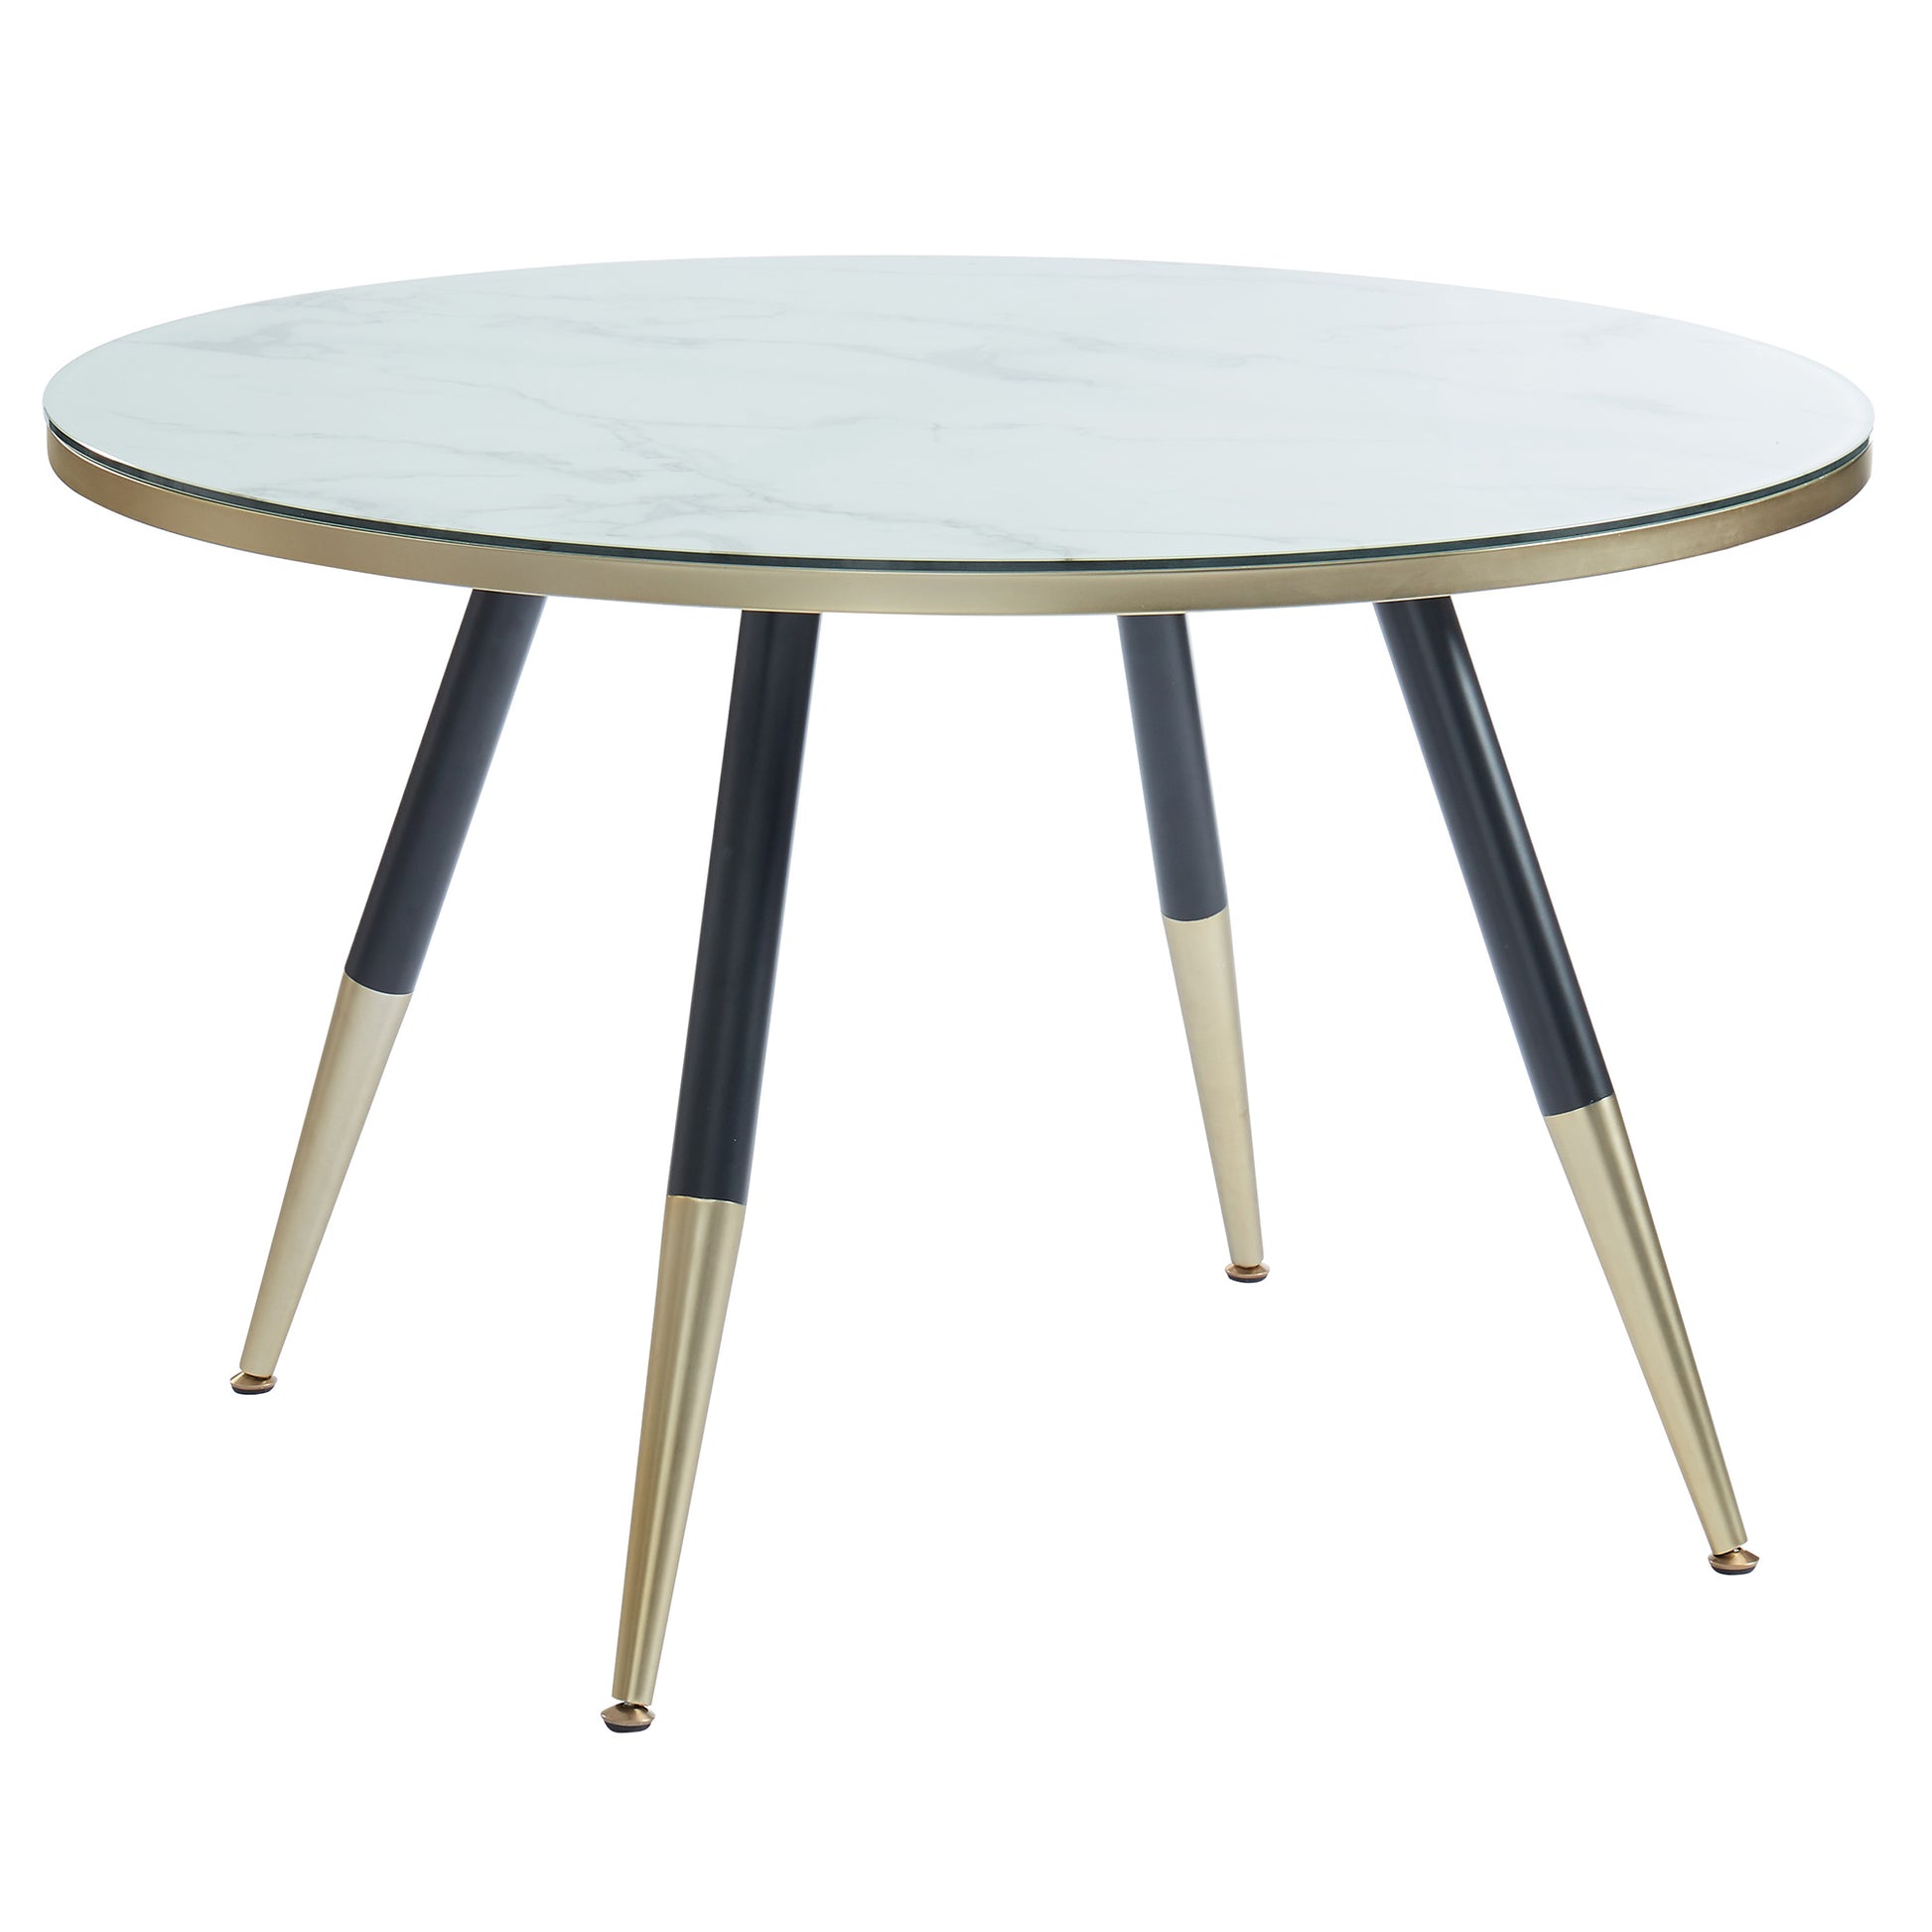 Cordelia Round Dining Table in White - Dreamart Gallery